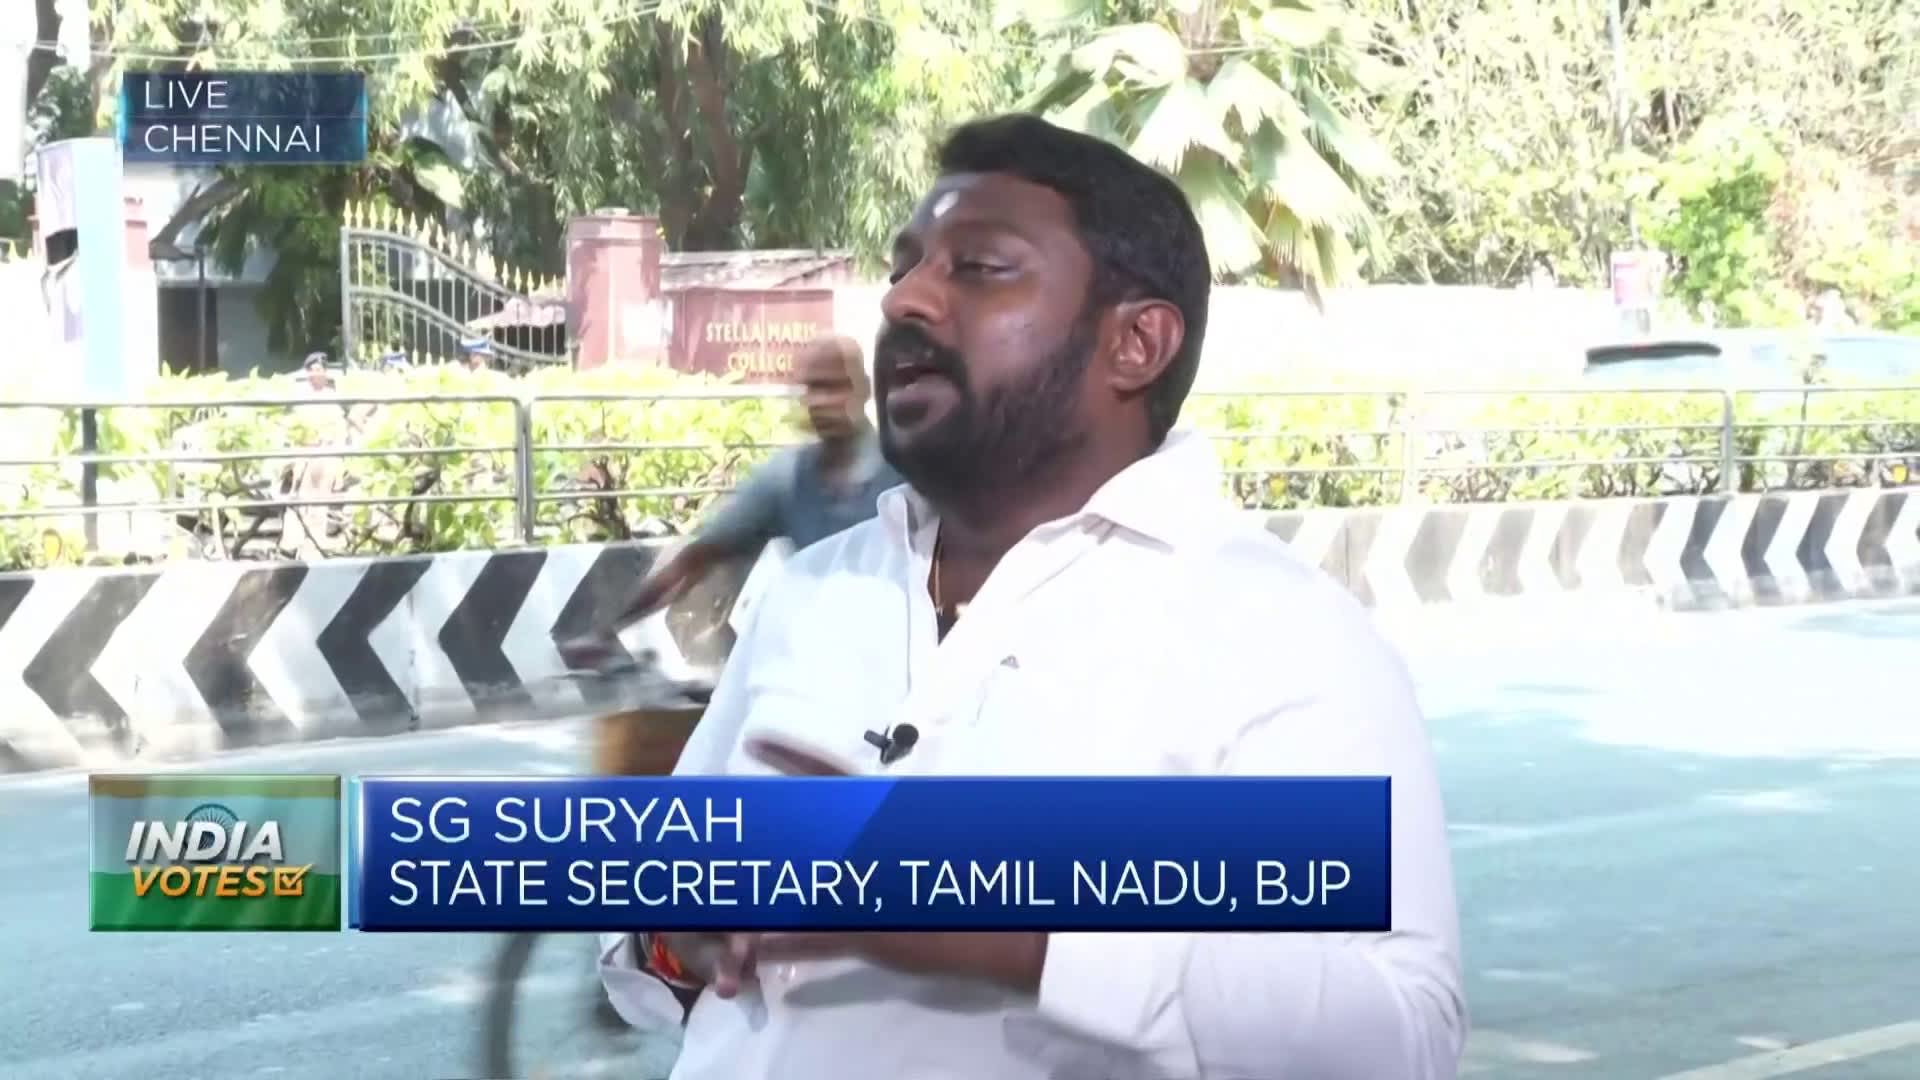 Foreign direct investment in Tamil Nadu: Modi’s policies or state government’s vision? [Video]